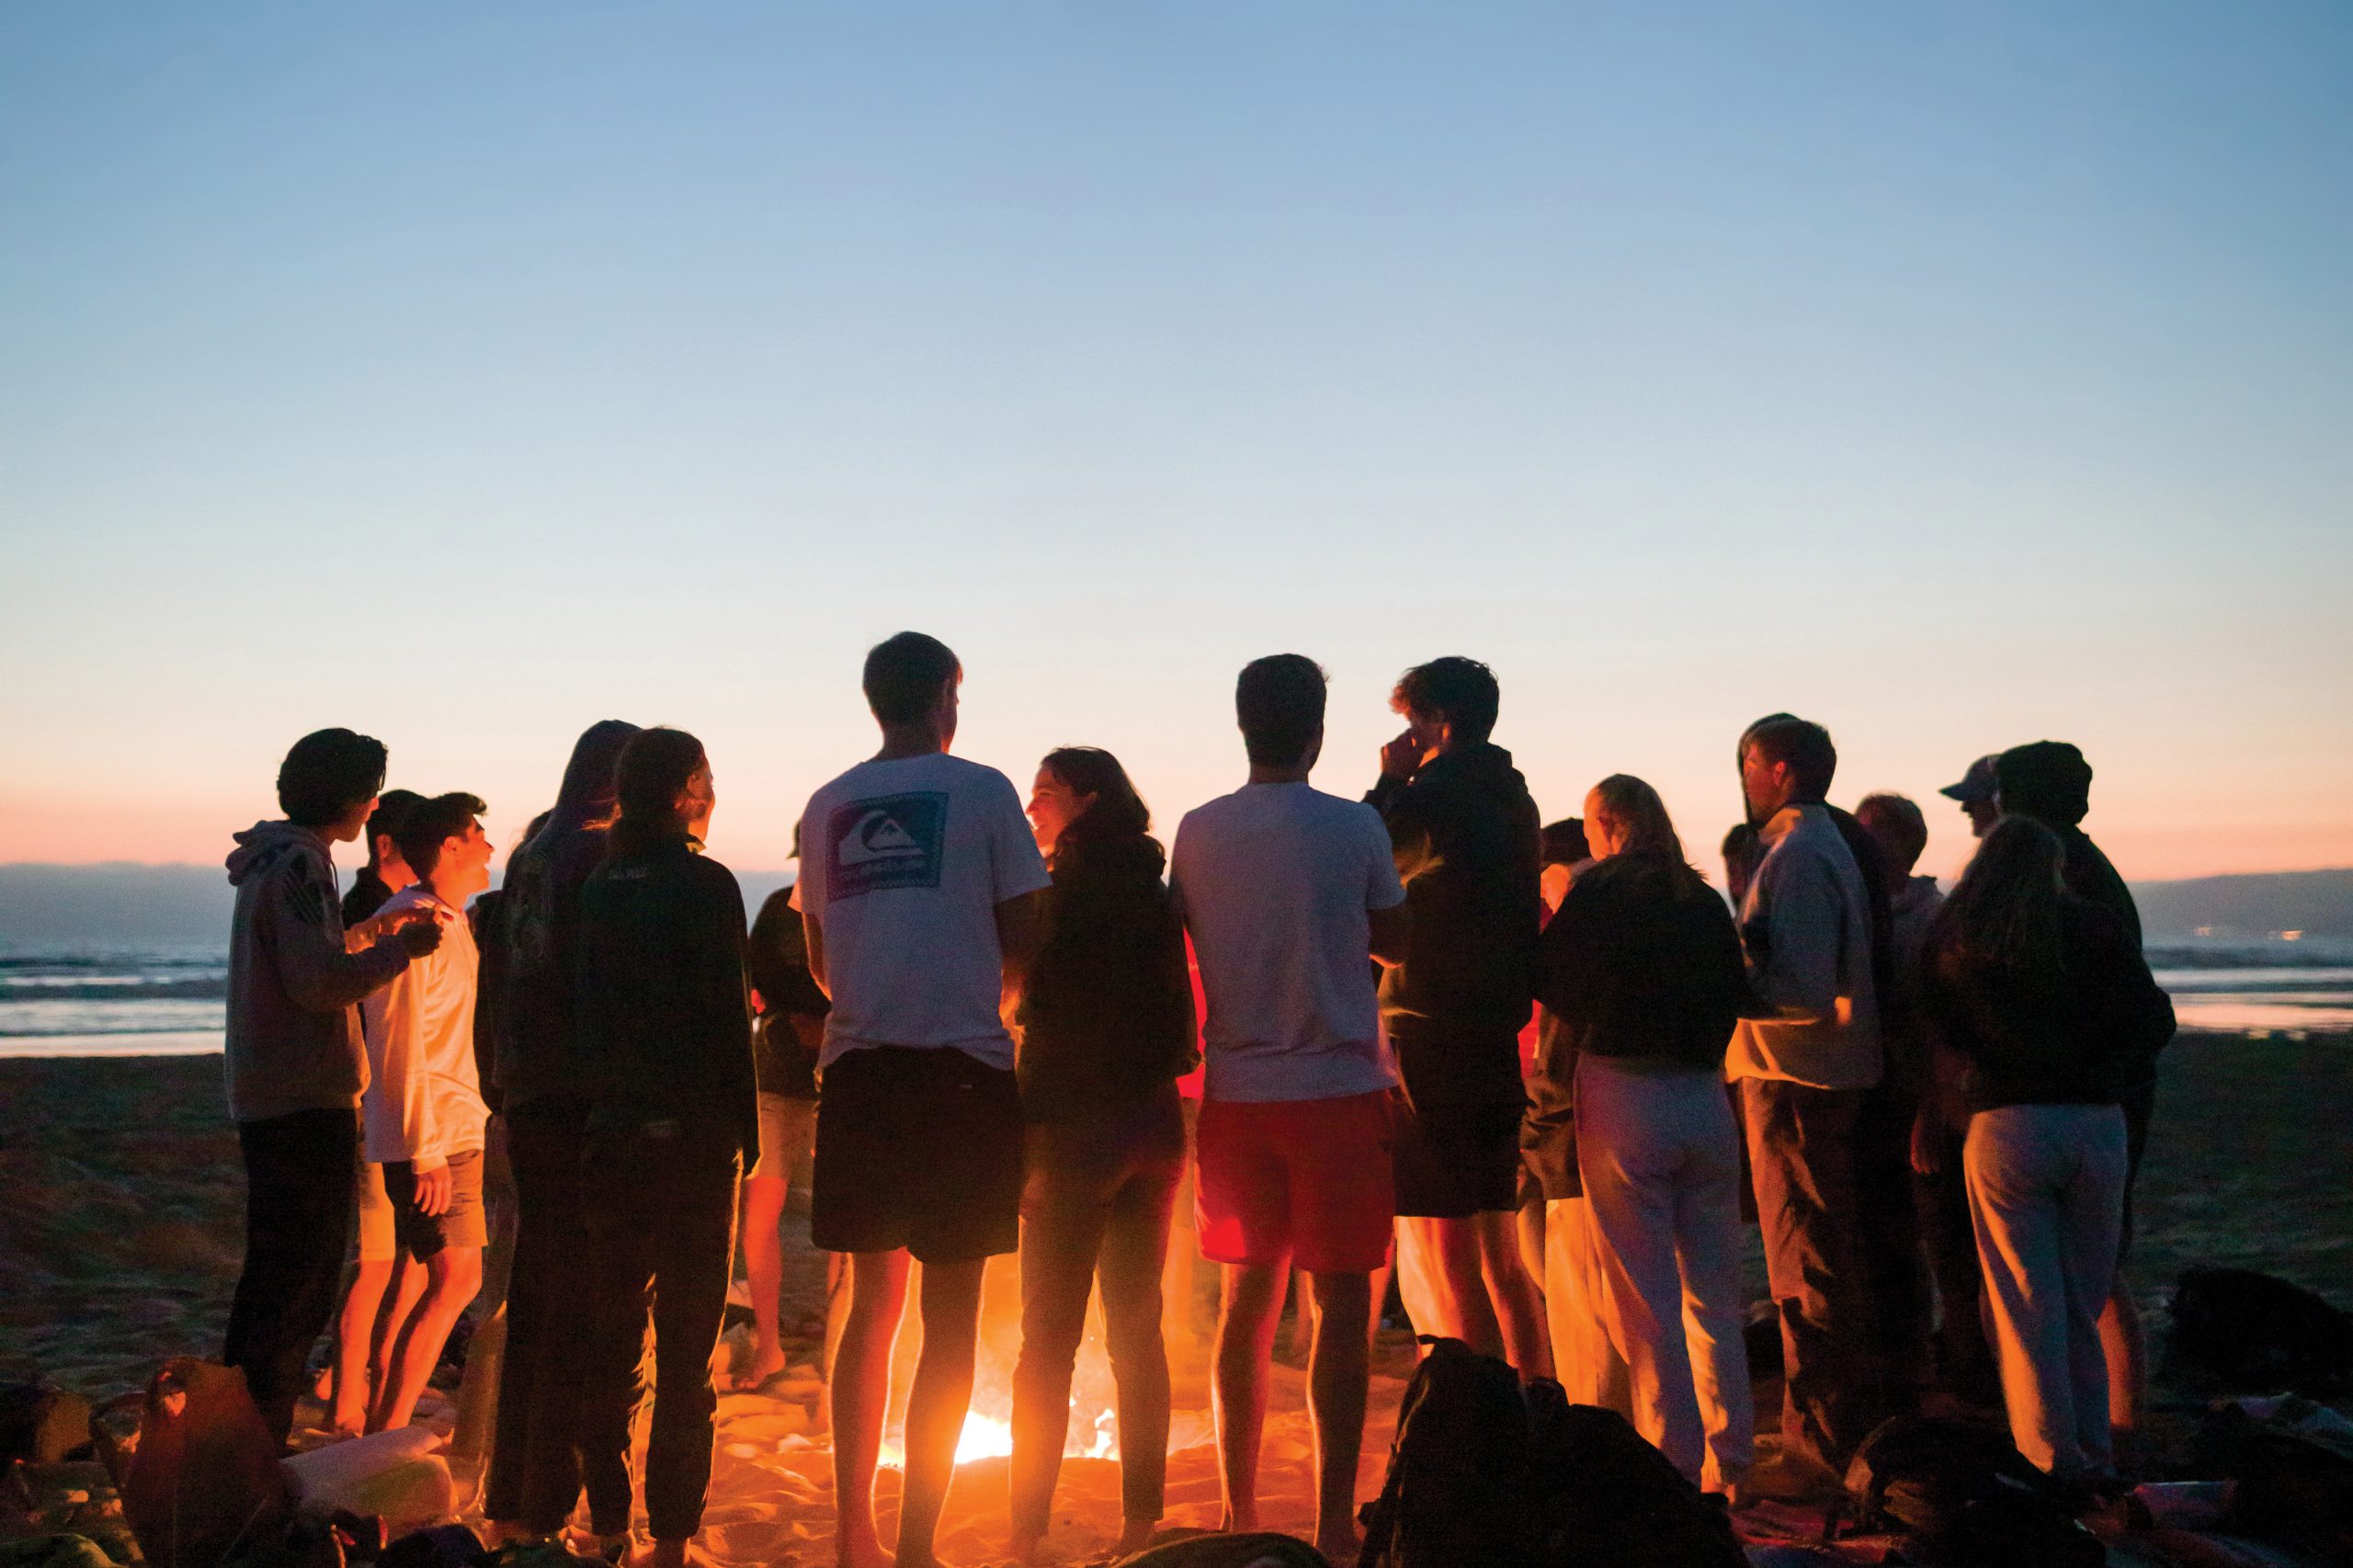 A group of students stand in a circle at sunset on the beach, lit by the glow of the bonfire at the center of the circle